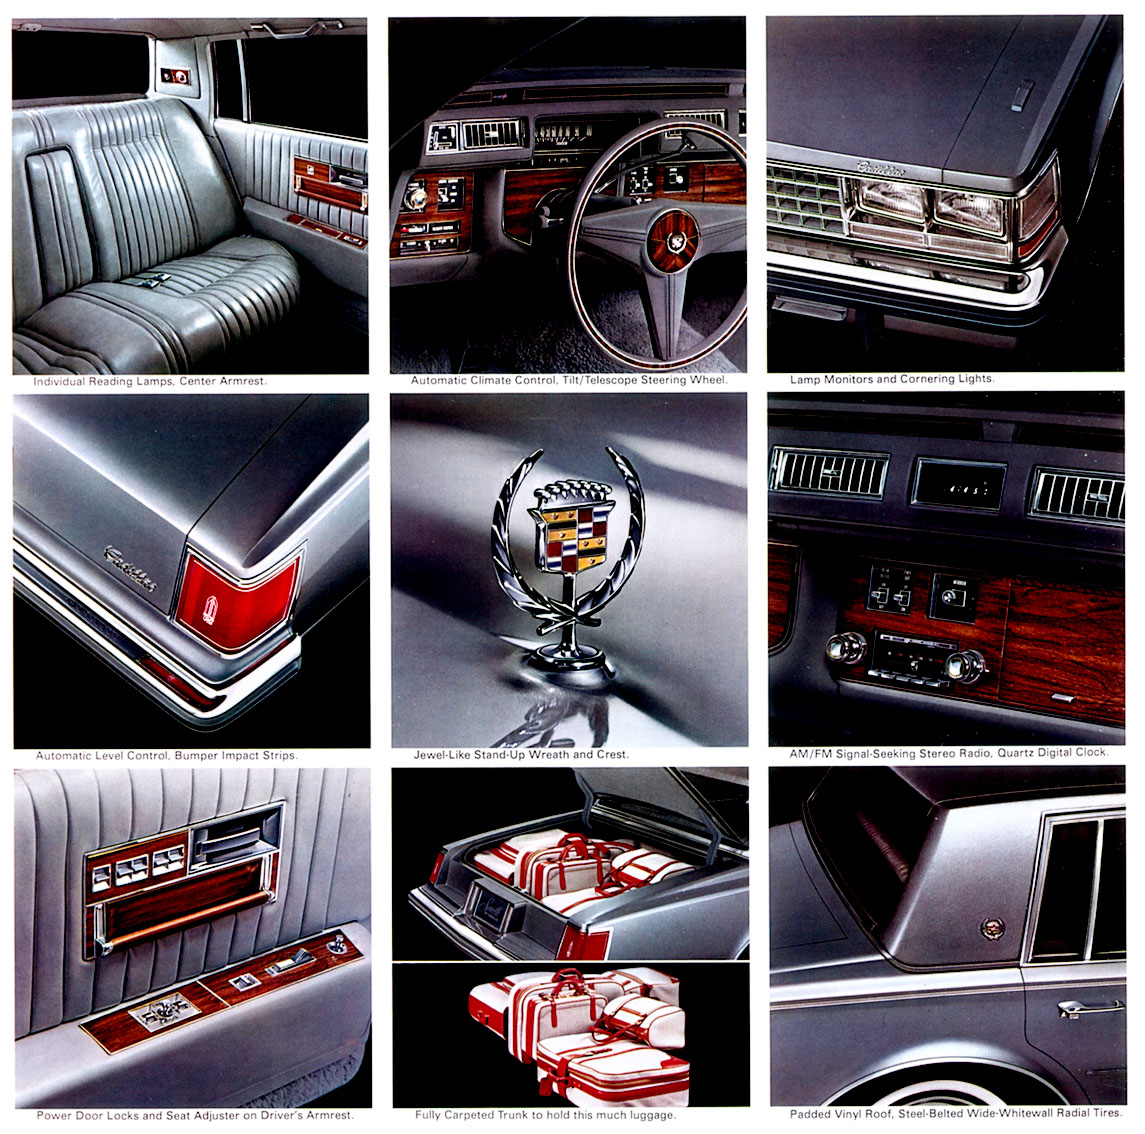 1976 Cadillac Seville Brochure Page 1